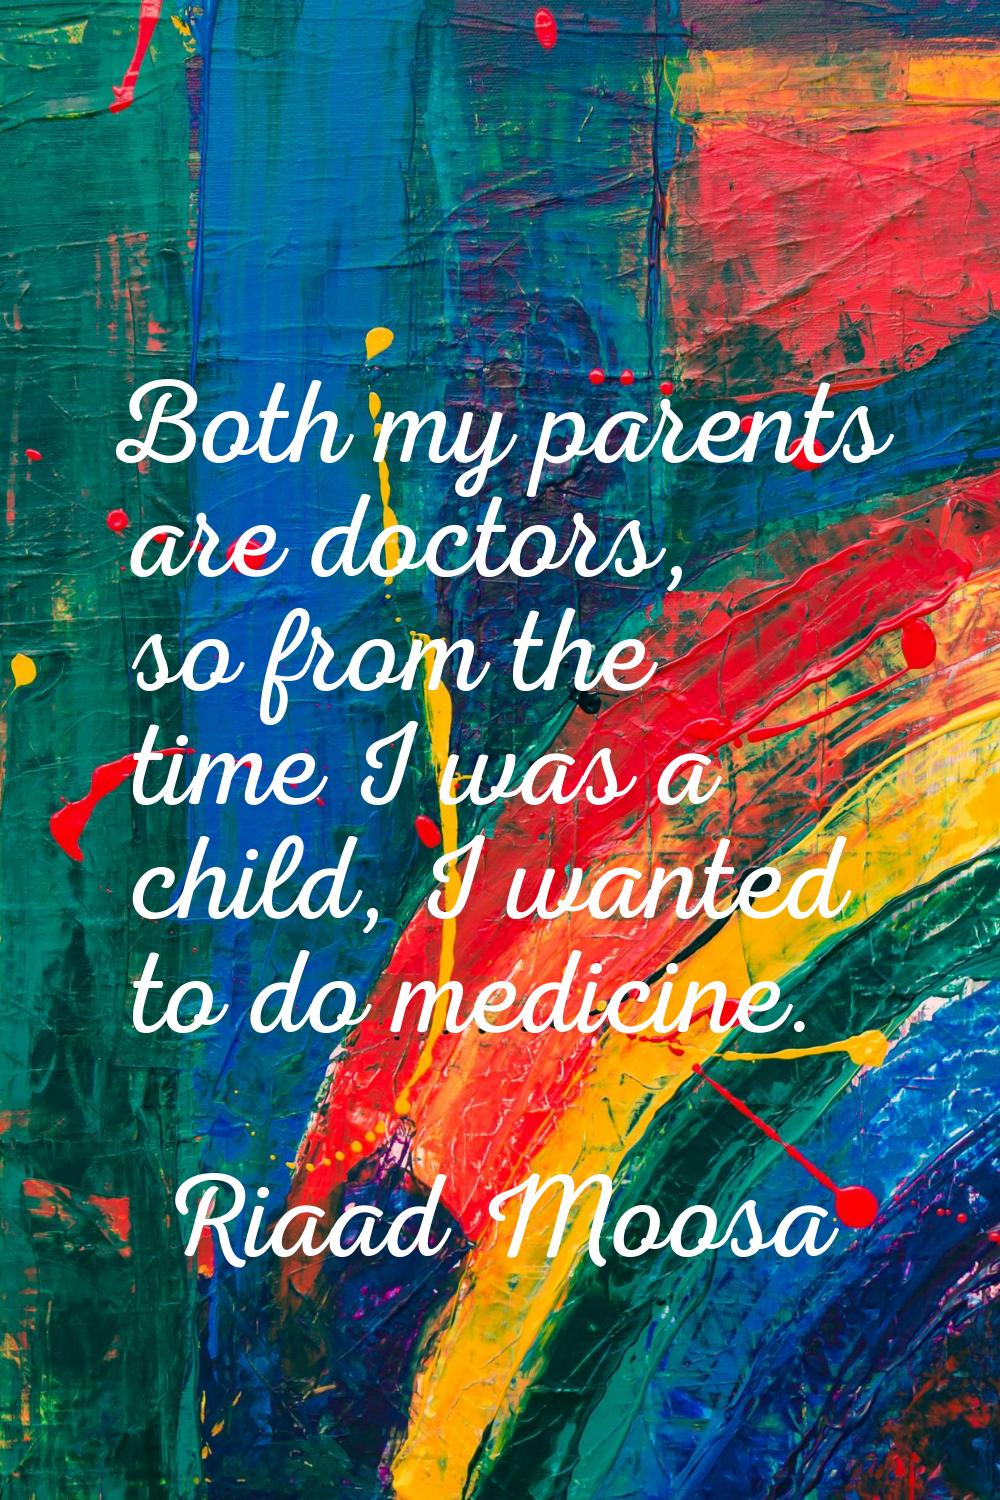 Both my parents are doctors, so from the time I was a child, I wanted to do medicine.